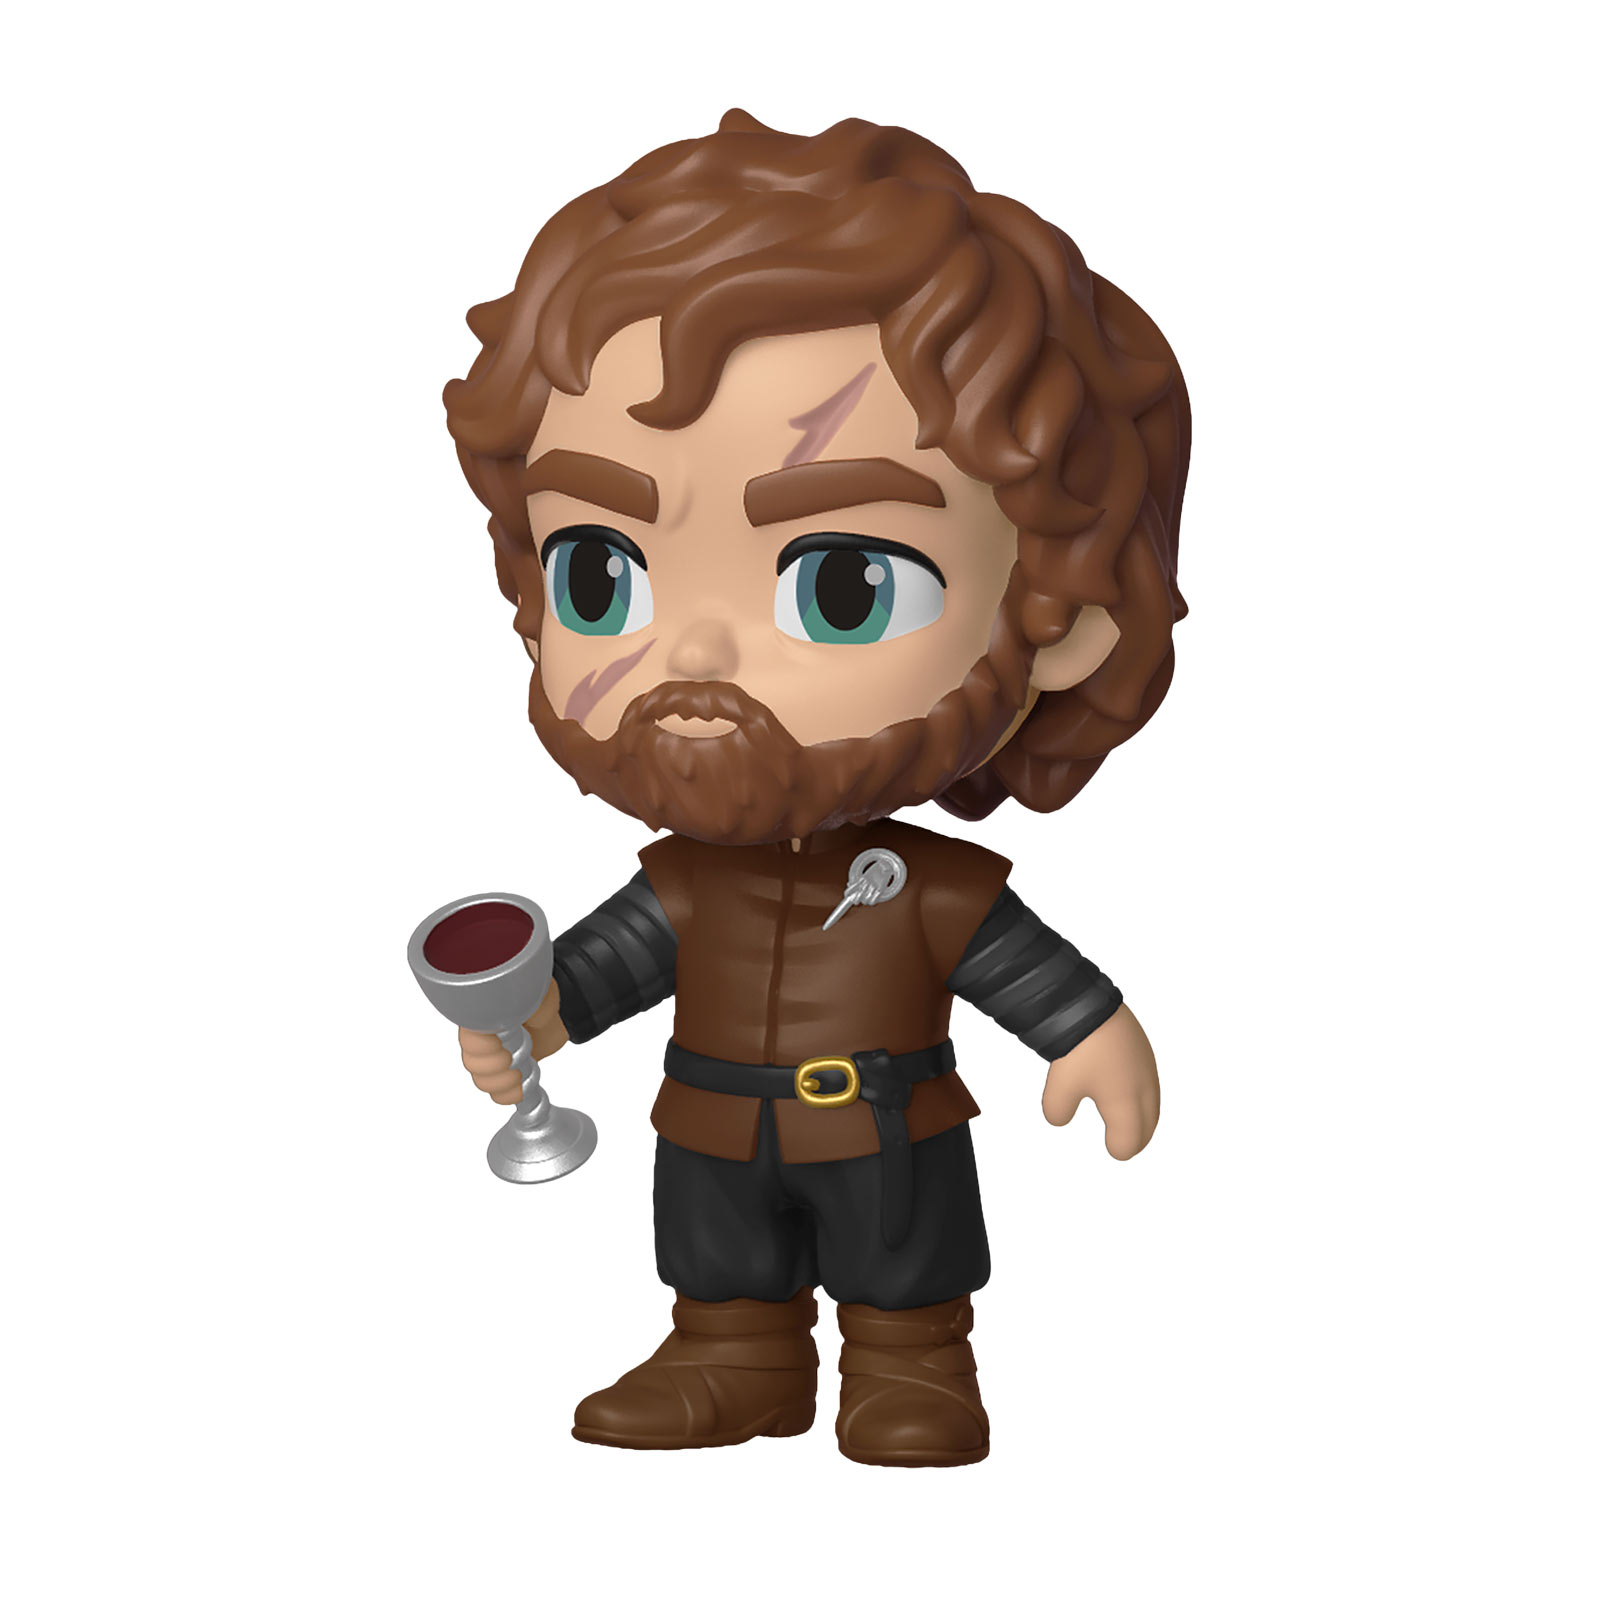 Game of Thrones - Tyrion Lannister Funko Five Star Figur